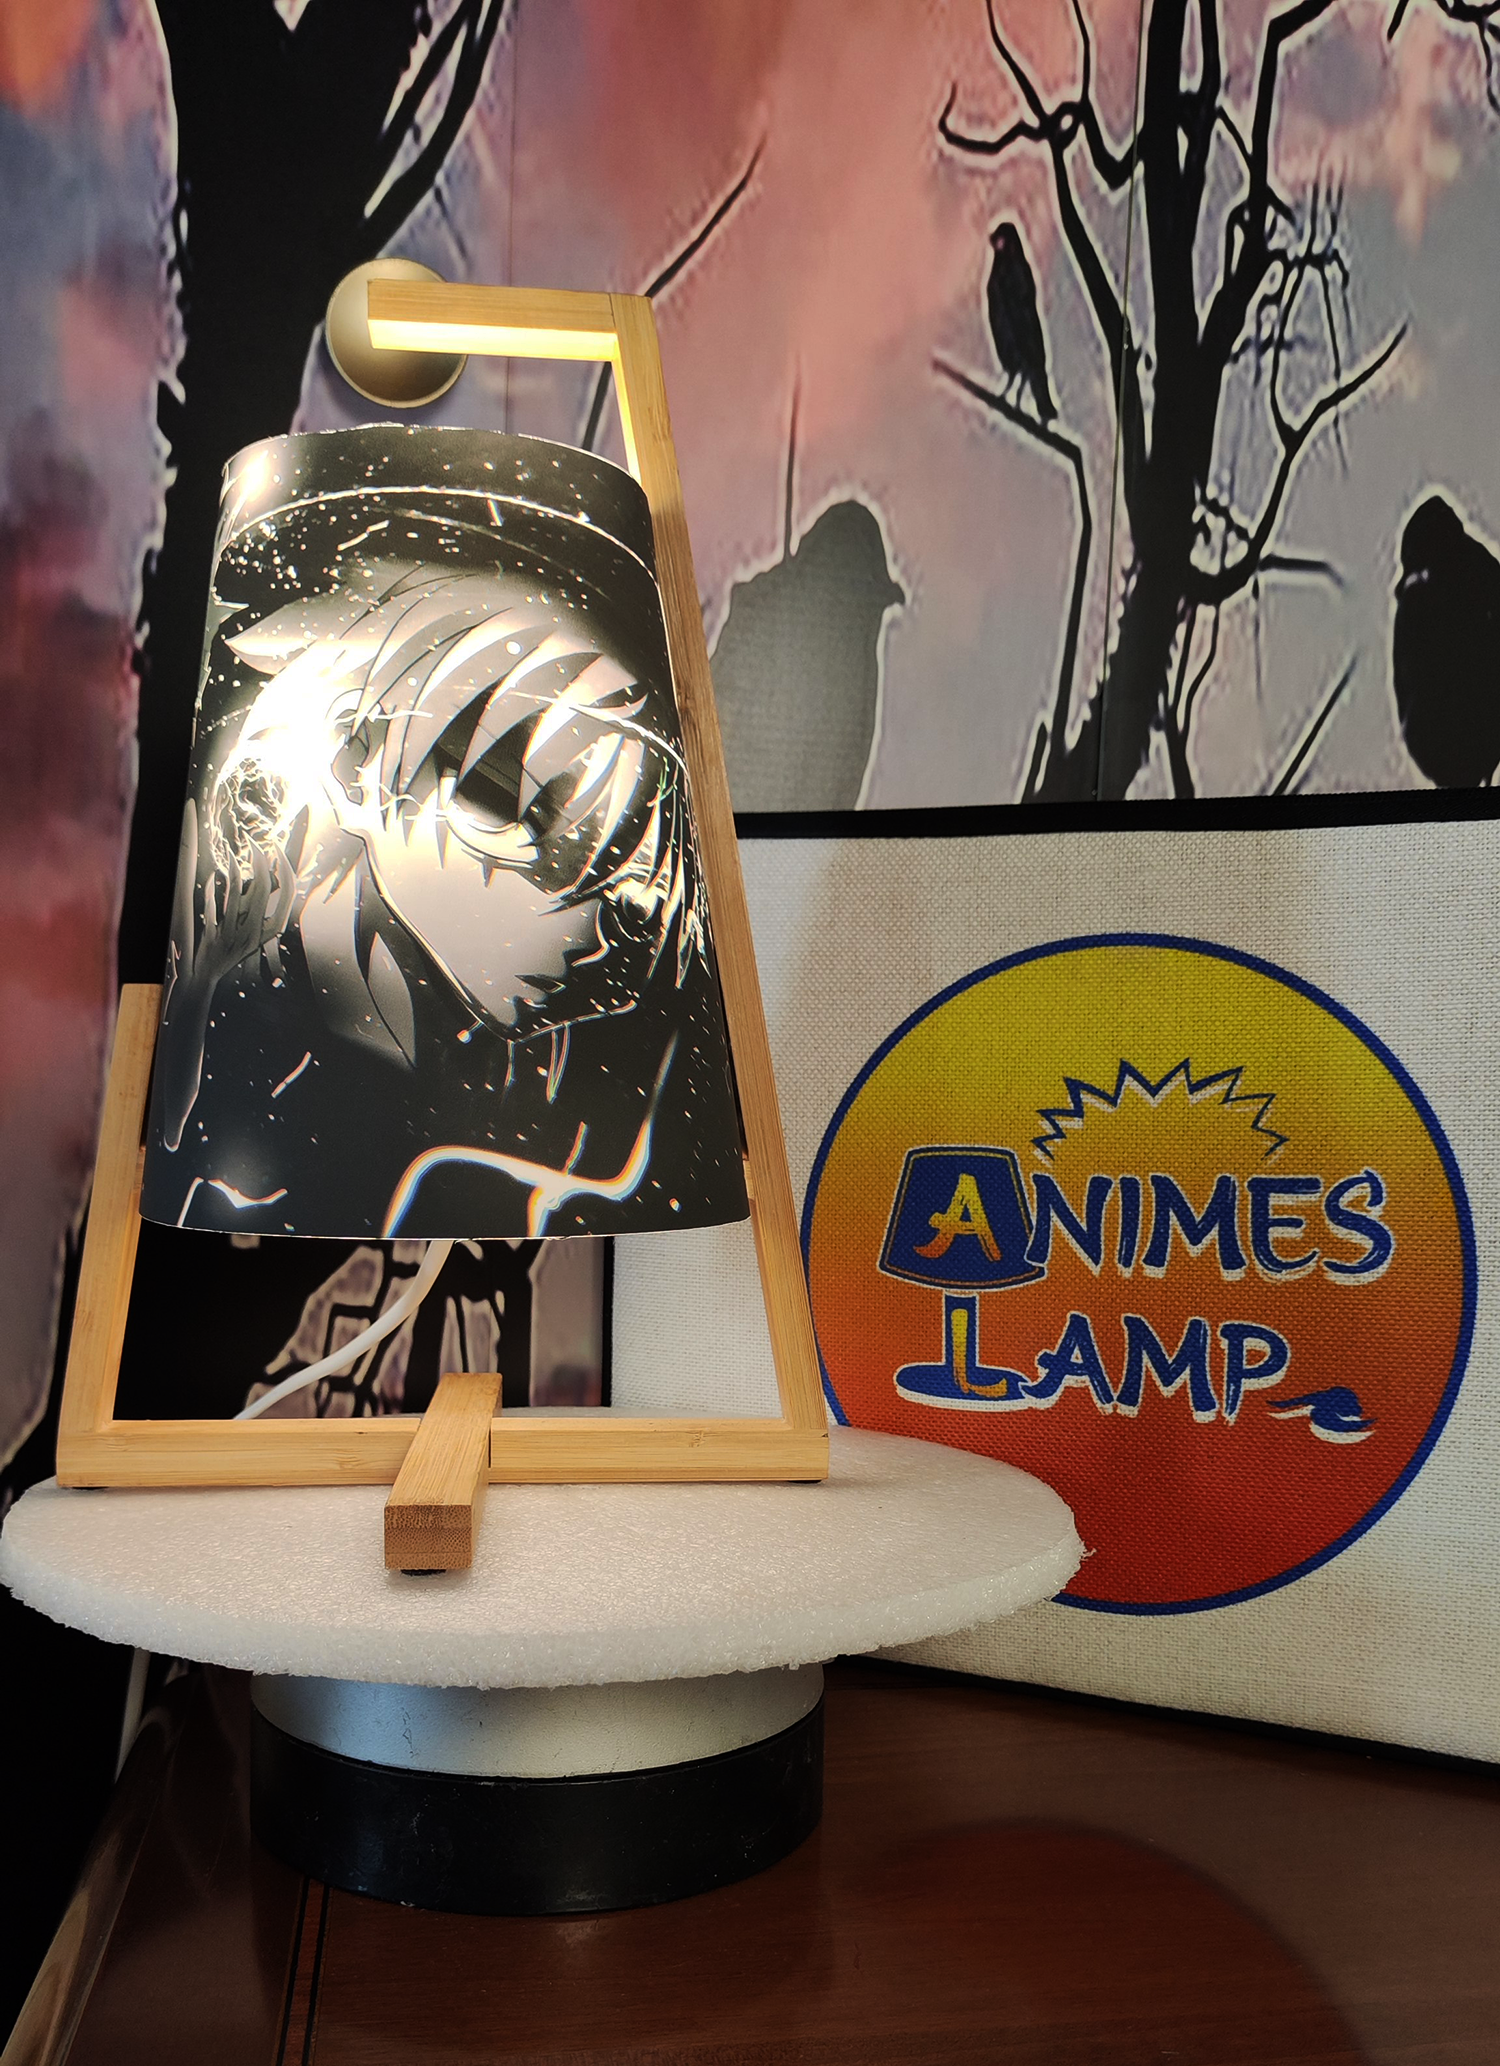 An anime lamp from the manga Hunter x Hunter featuring Killua in his electric transformation. Killua is portrayed with a gray template, eyes and hair illuminated in white, with electrical sparks in the image